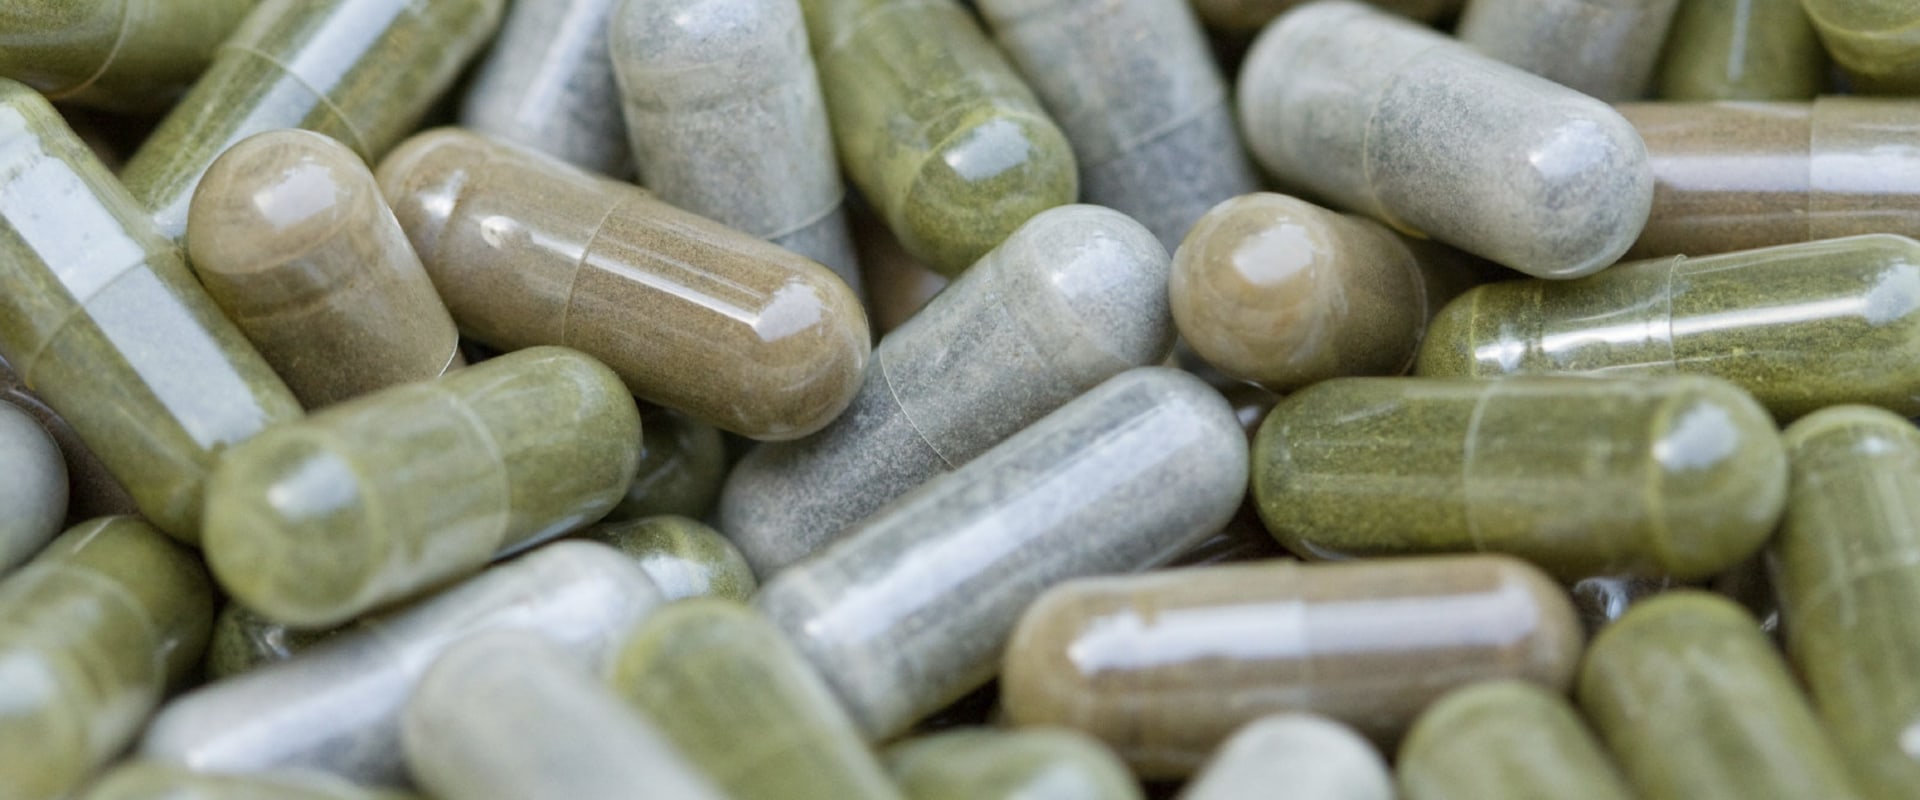 What are the Side Effects of Taking Supplements Daily?